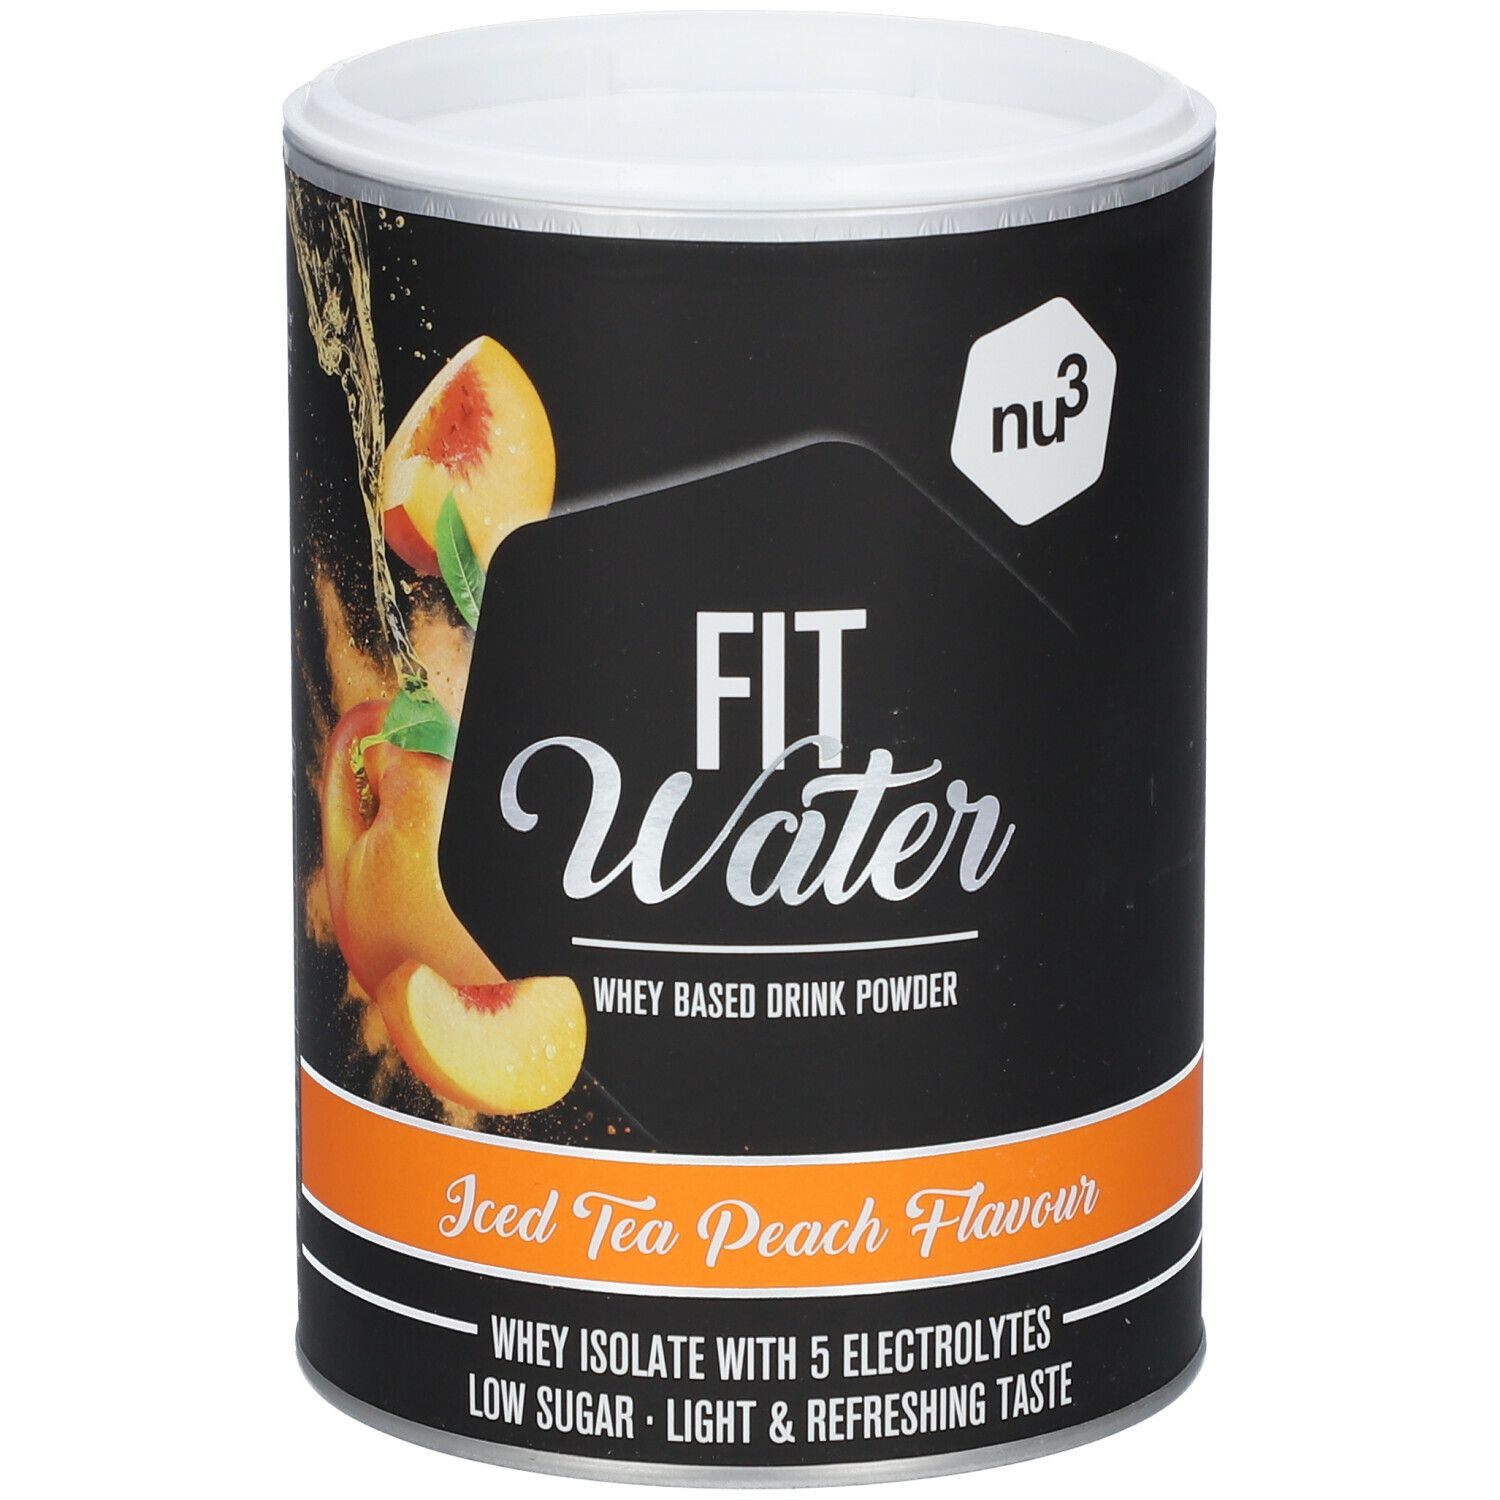 Image of nu3 Fit Protein Water, Iced Tea Peach